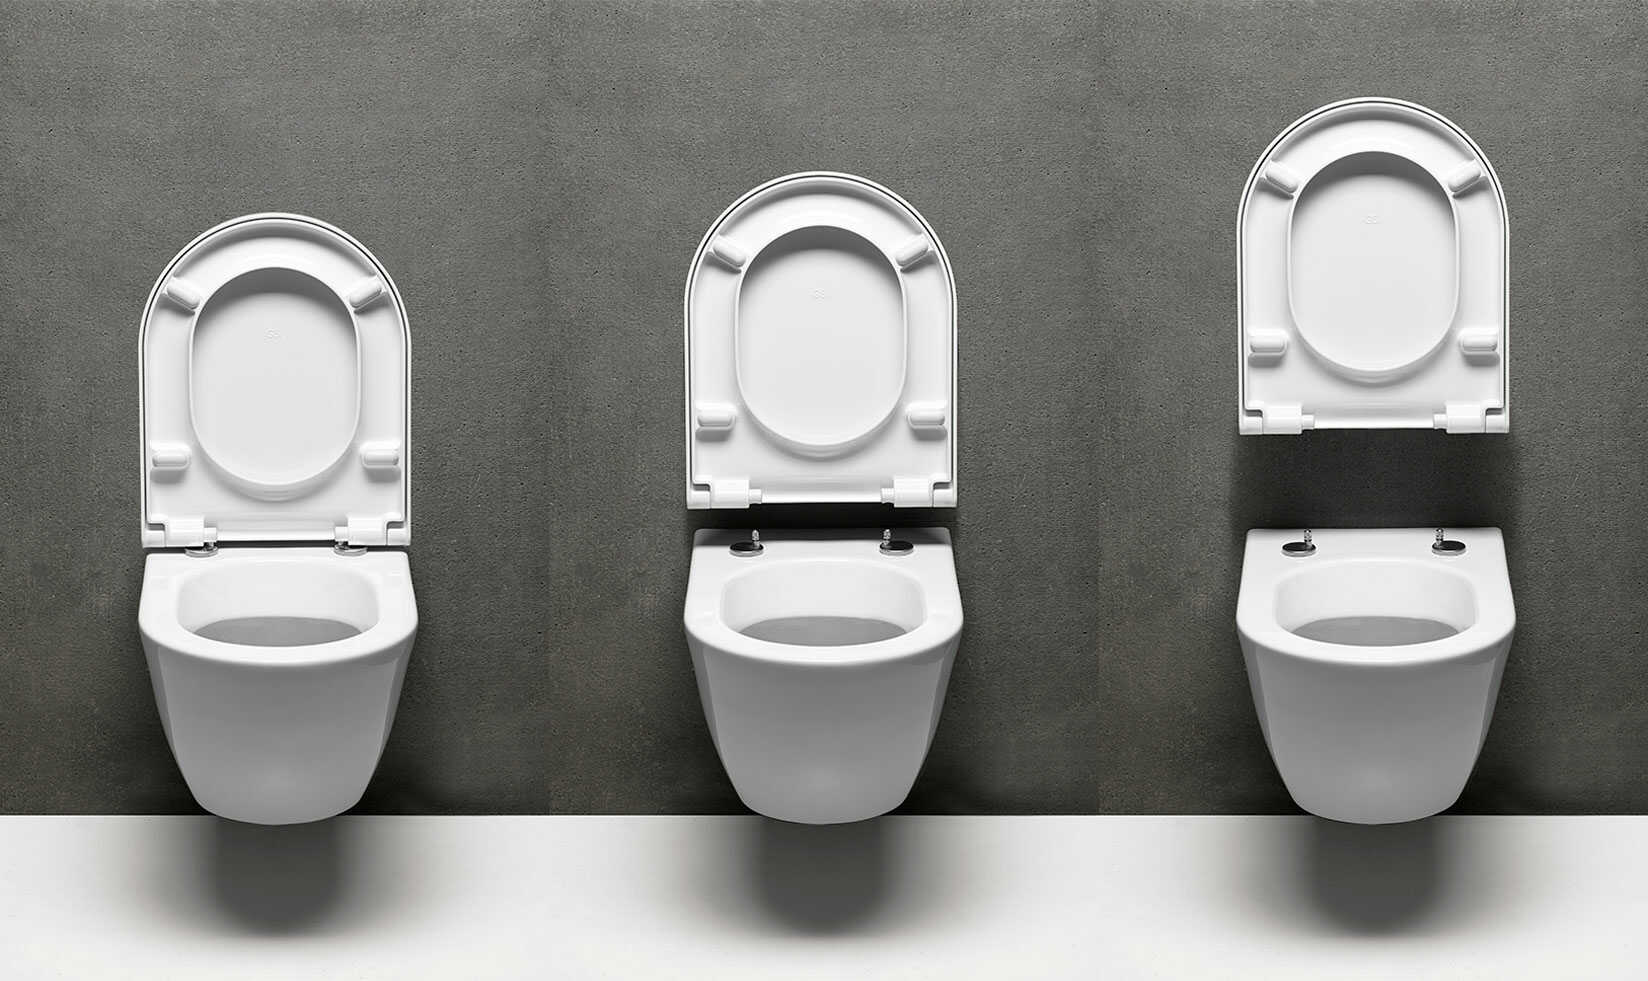 Quick release toilet seats: Why should I get one? - Bathroom Ideas